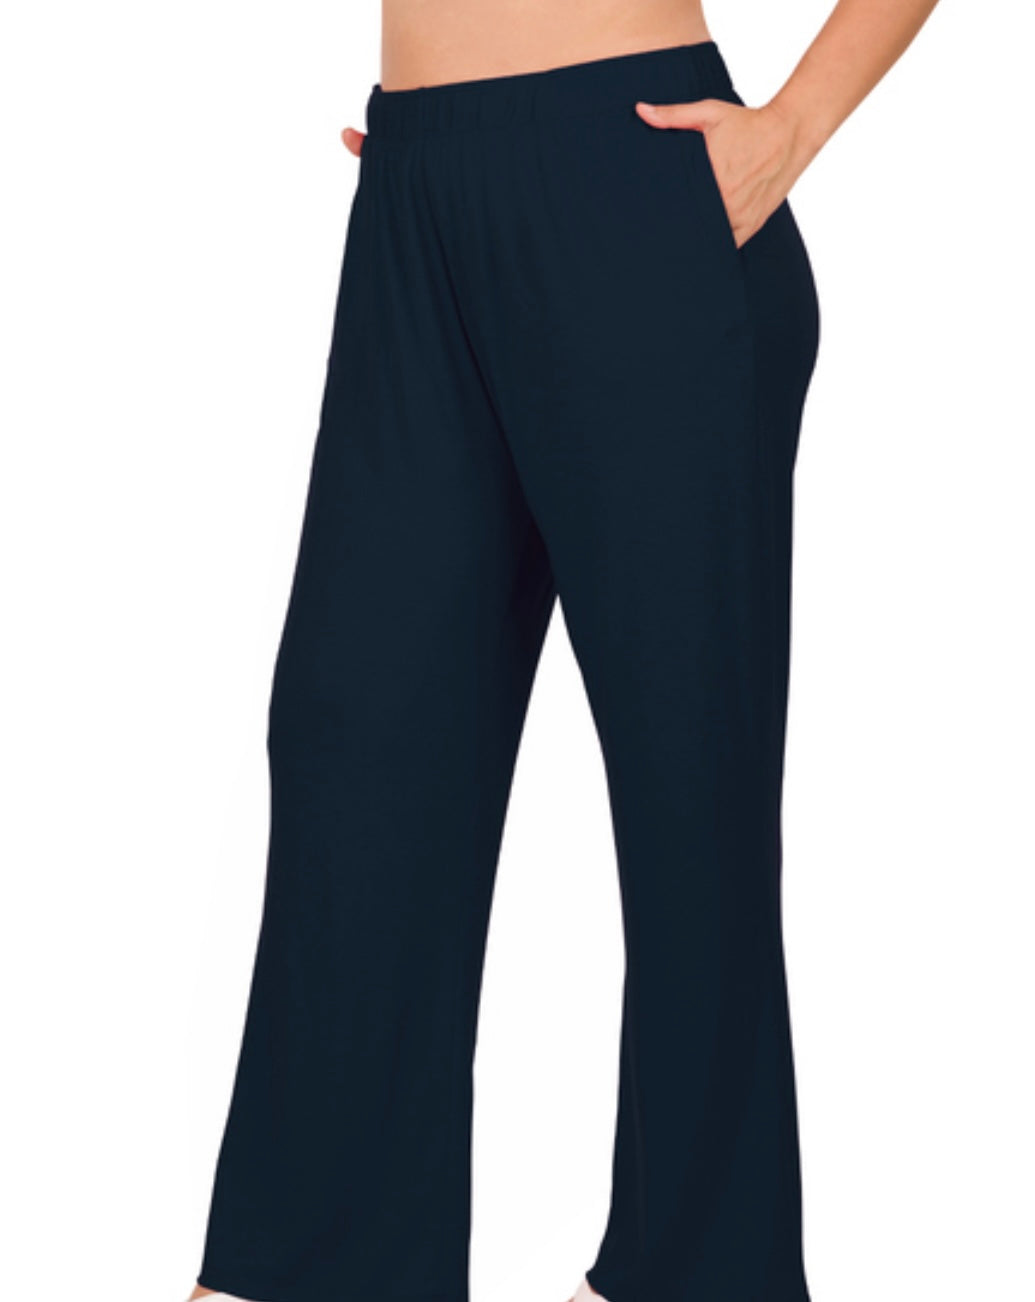 Doorbuster! Time to Lounge Drawstring Pants! 2 Colors!